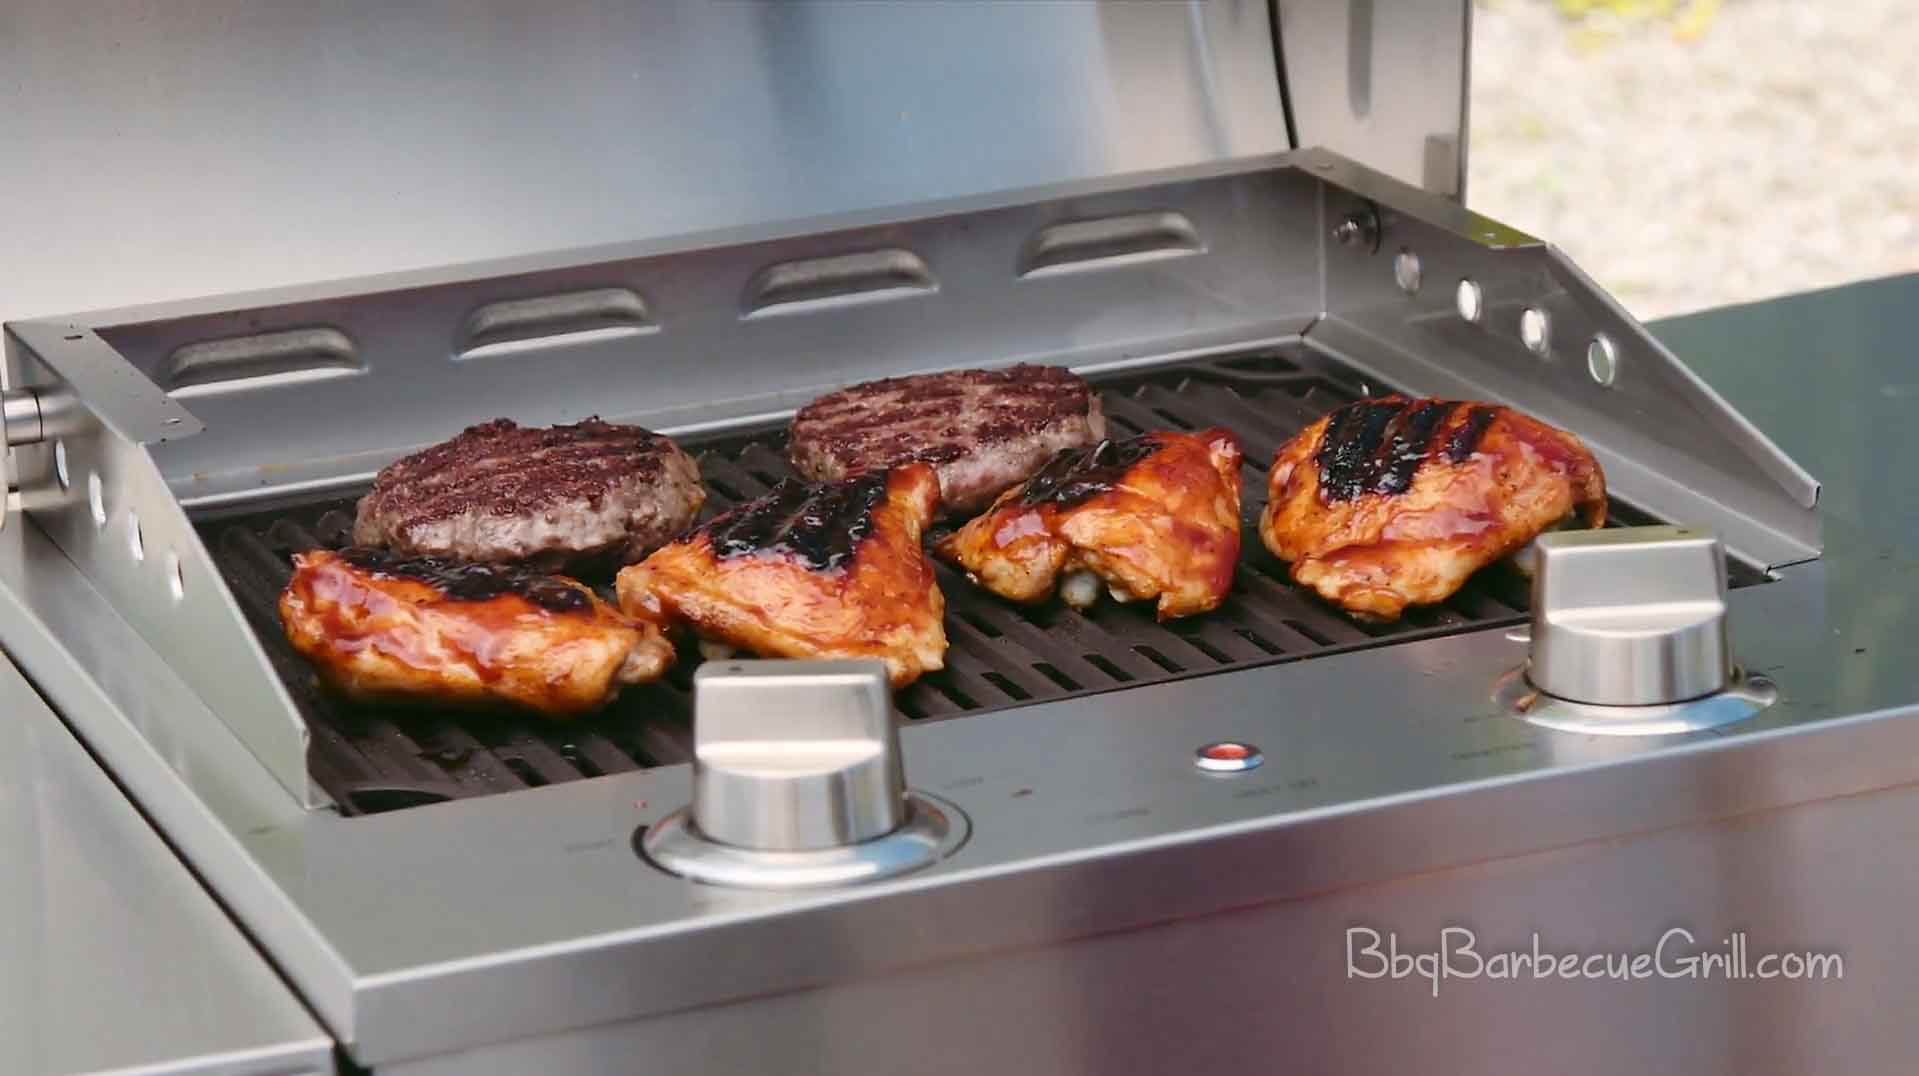 Best Outdoor Electric Grill 2021 What's the Best Built In Electric Grill in 2020?   BBQ, Grill